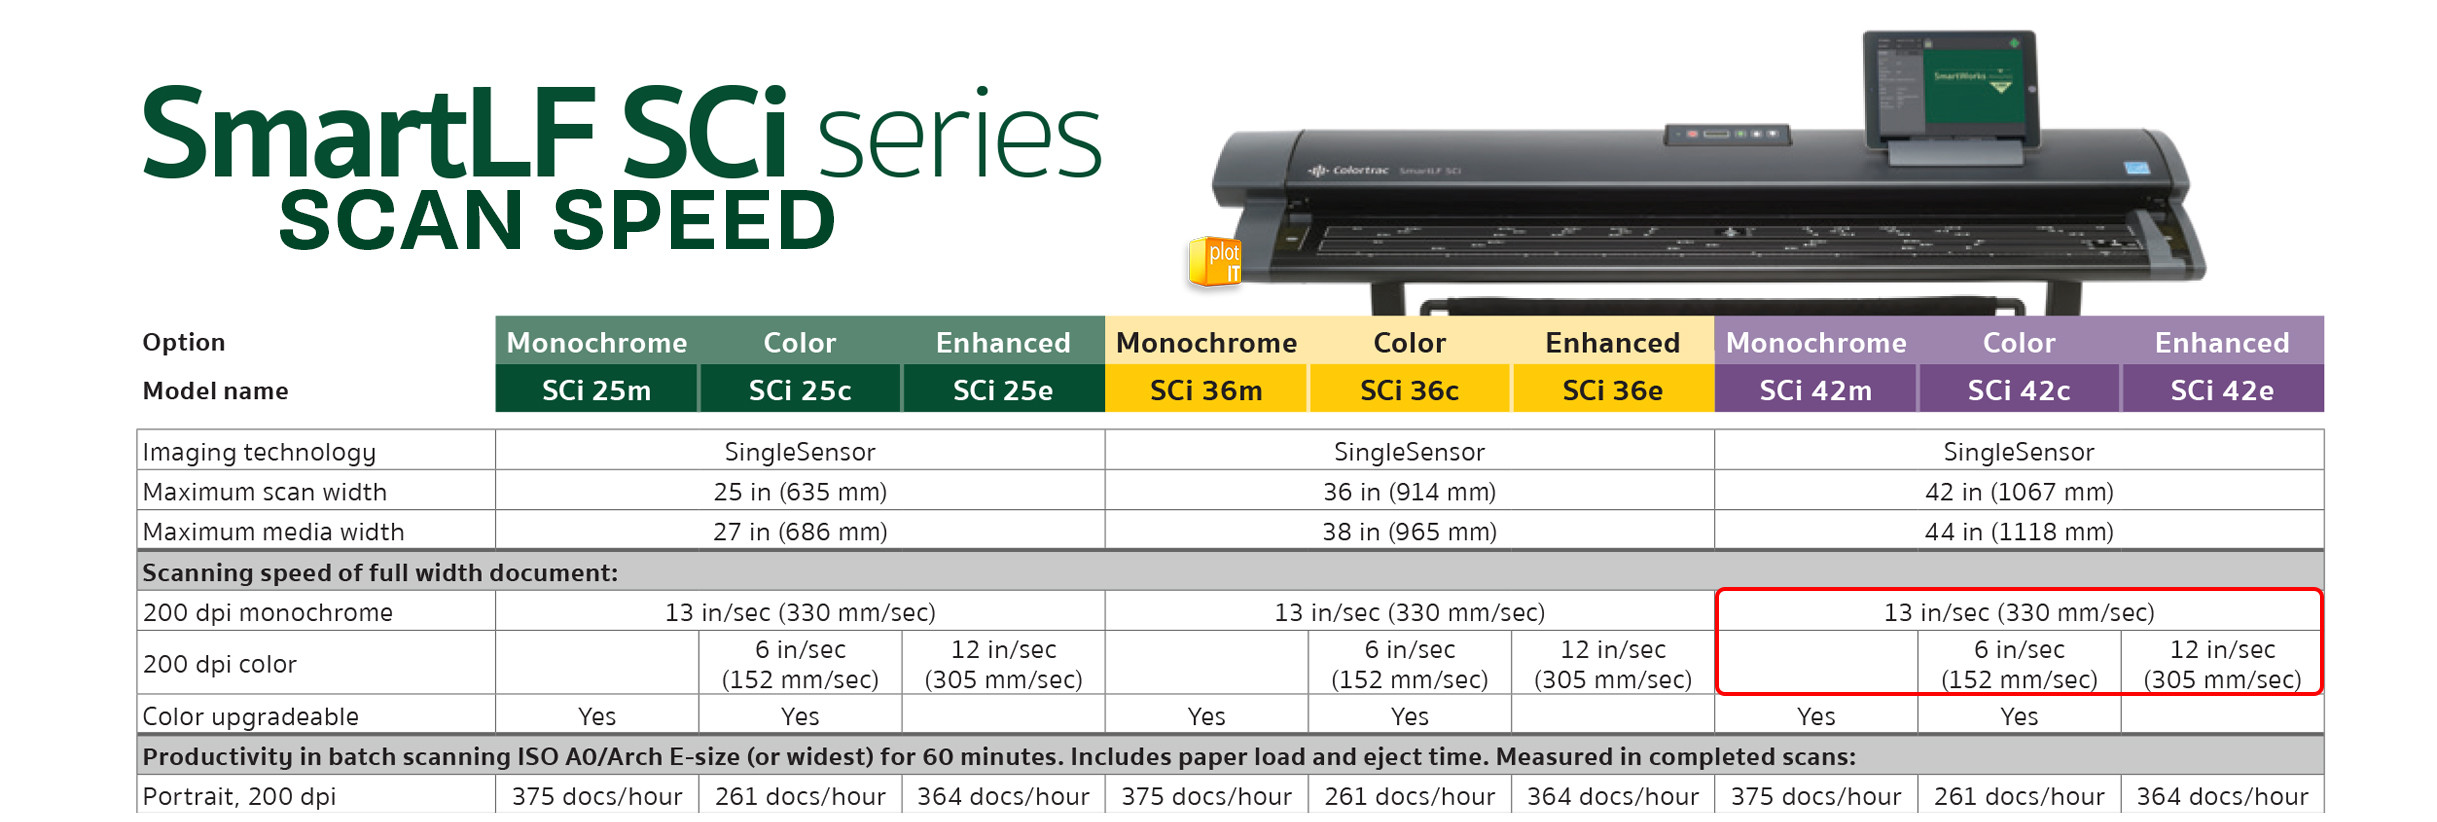 COLORTRAC SCi Series SCAN SPEED SCi42